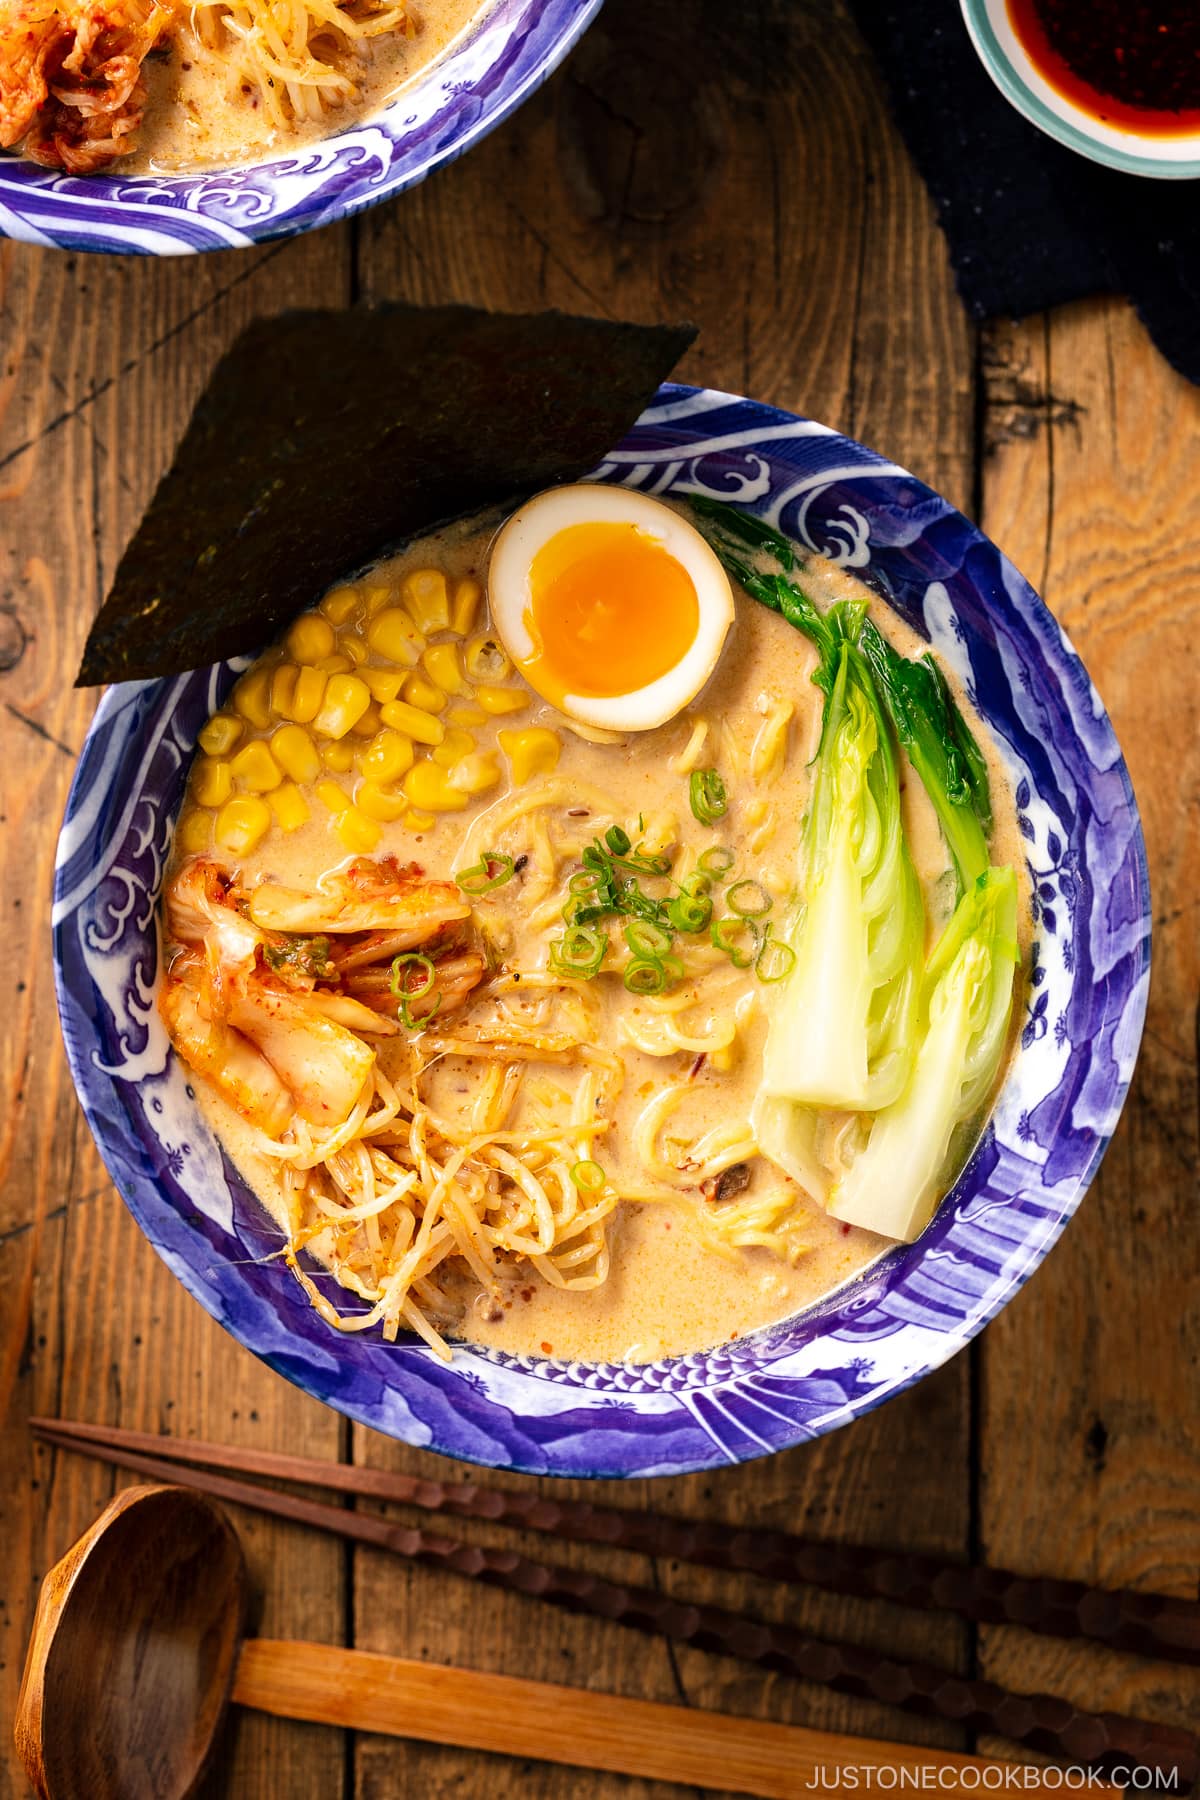 A bowl of Vegetarian Ramen topped with ajitama (soy marinated egg), spicy bean sprouts, corn, and a green veggie.